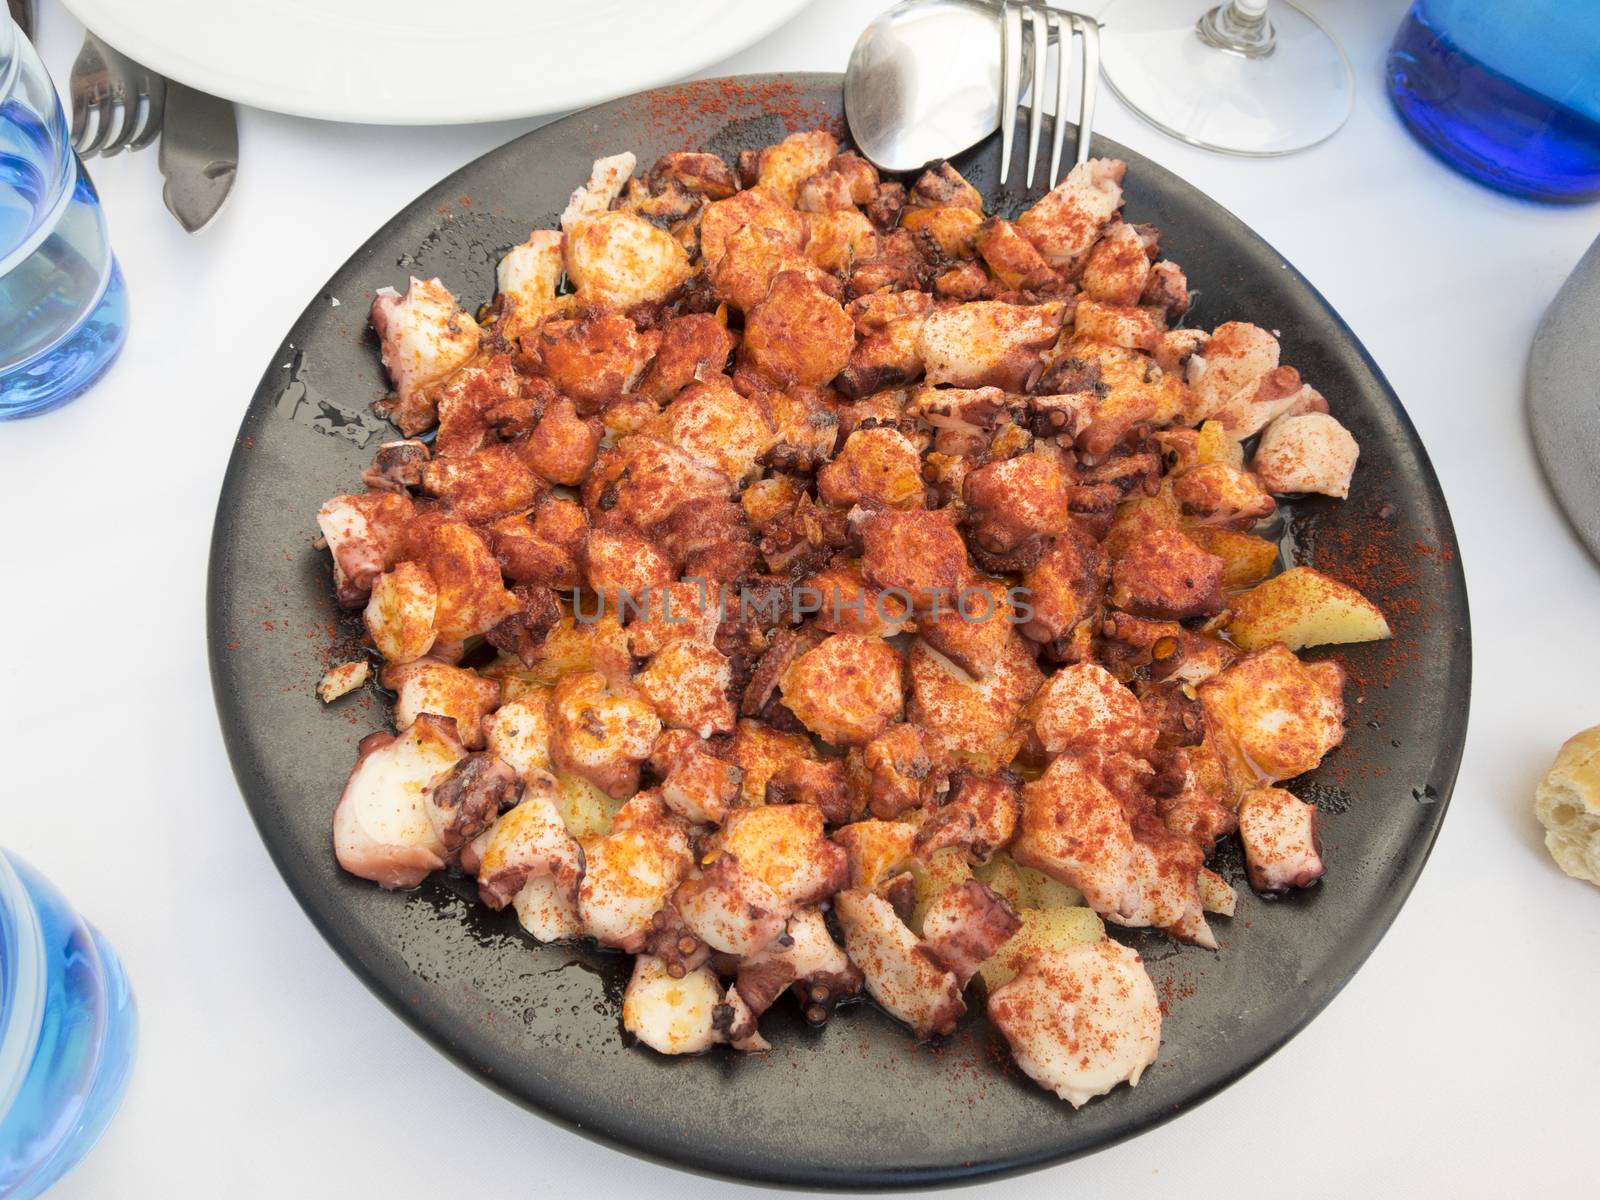 black dish with octopus and potatoes cooked like Galician style with paprika